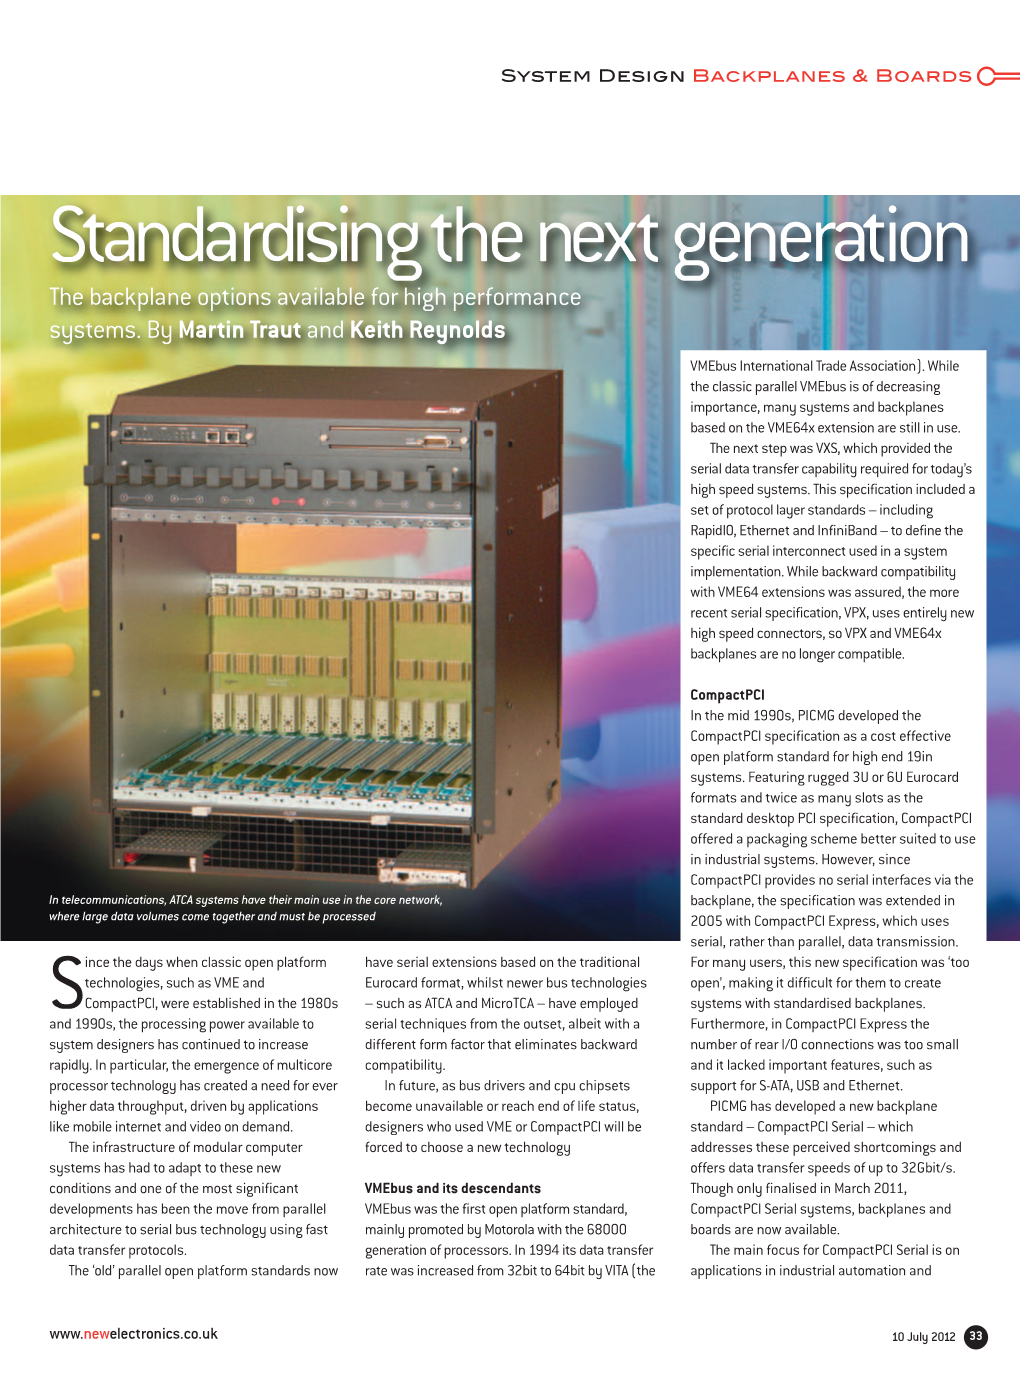 Standardising the Next Generation the Backplane Options Available for High Performance Systems